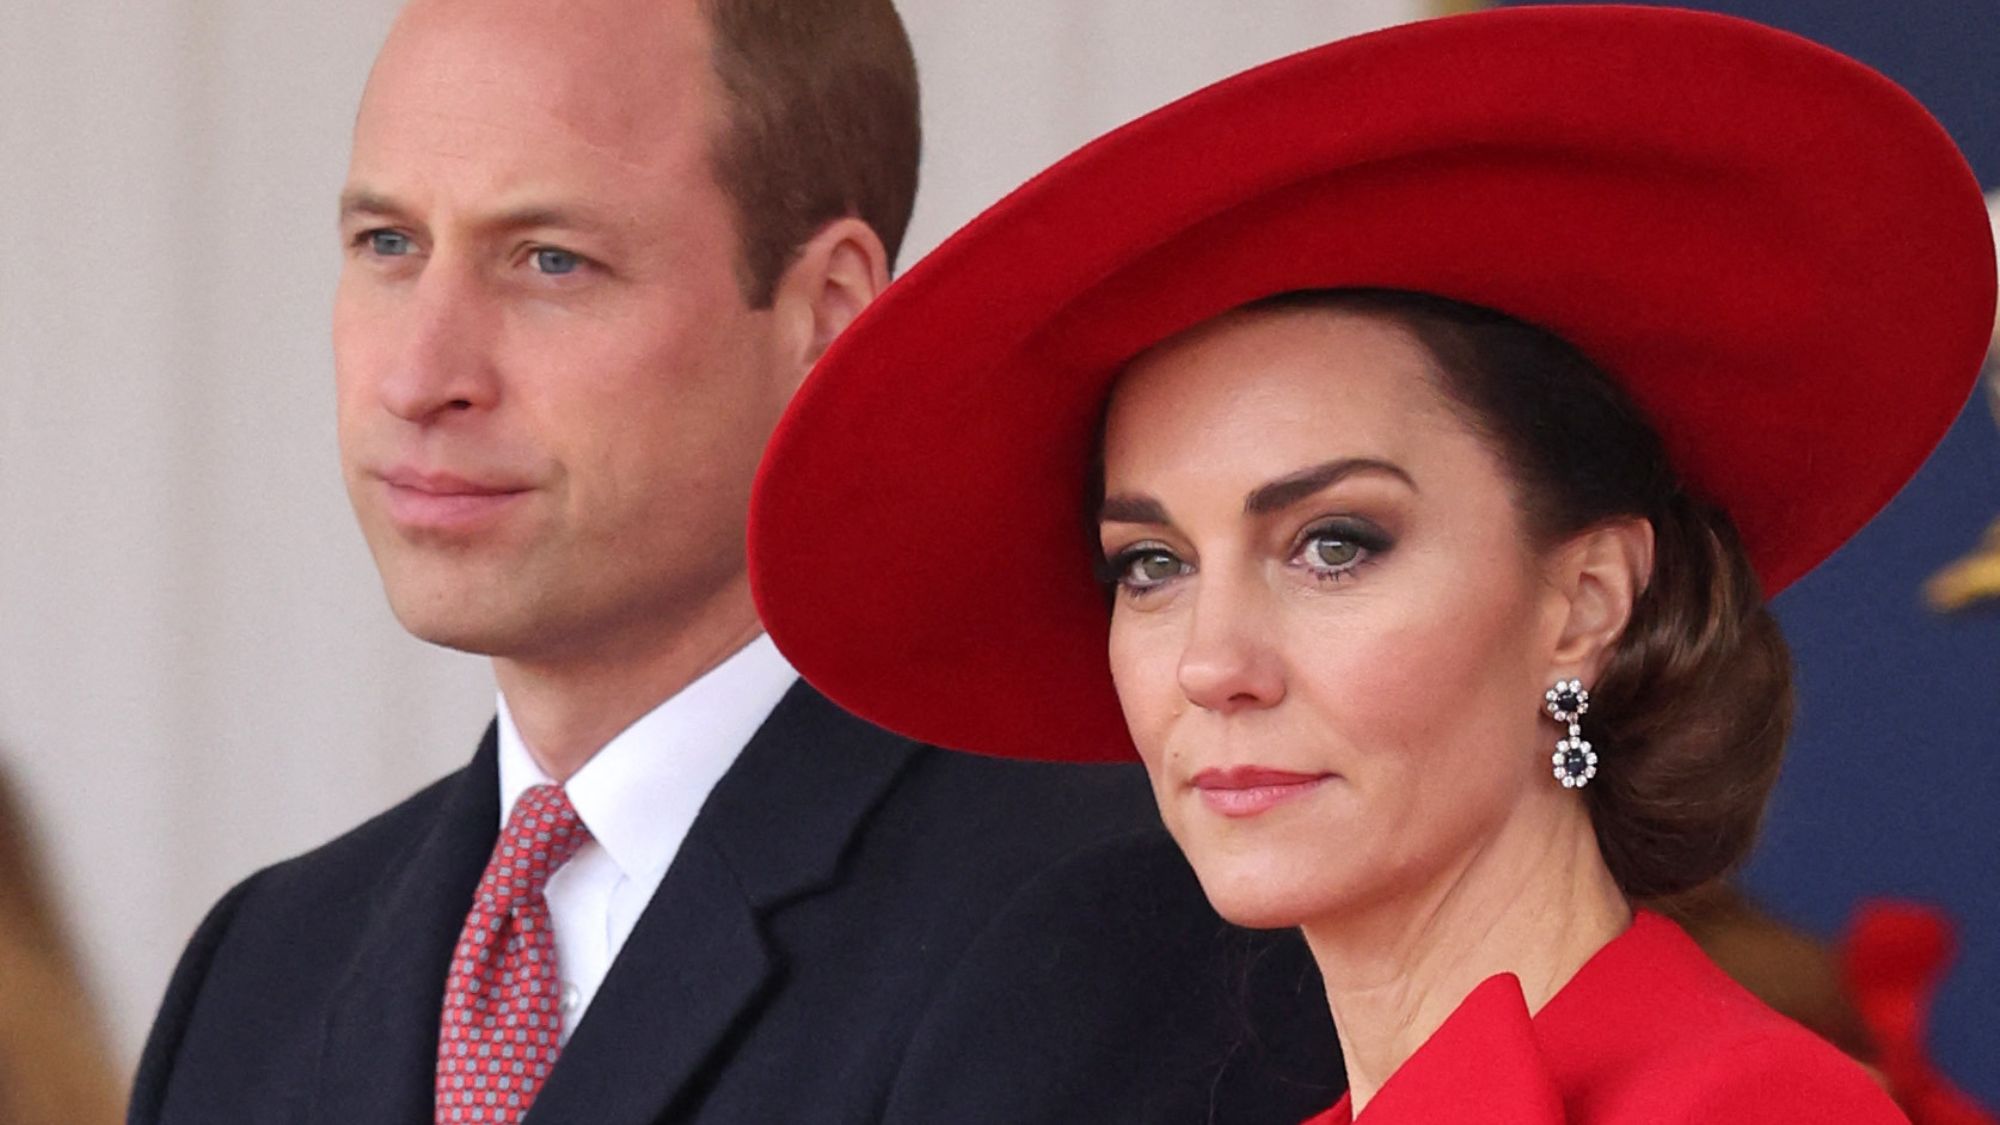 News on Kate Middleton's cancer battle comes from a close friend.